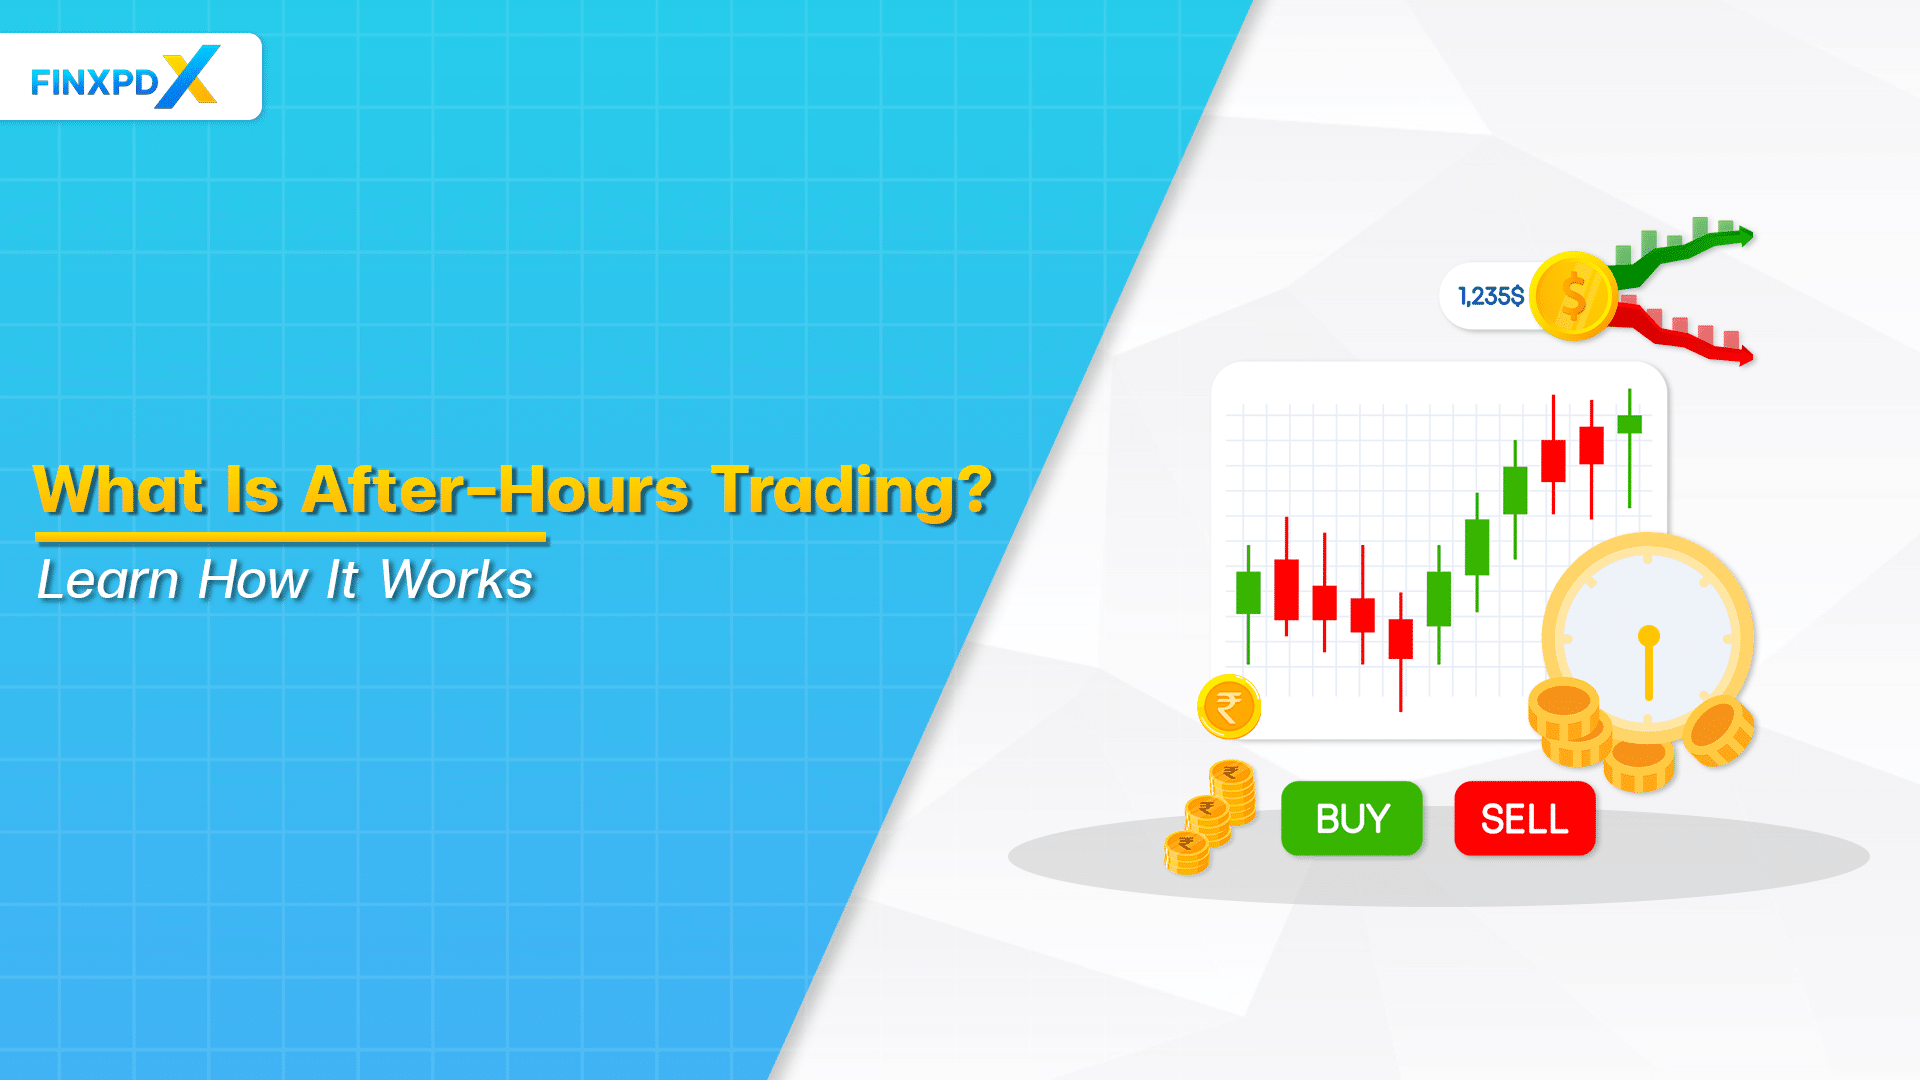 After-Hours Trading